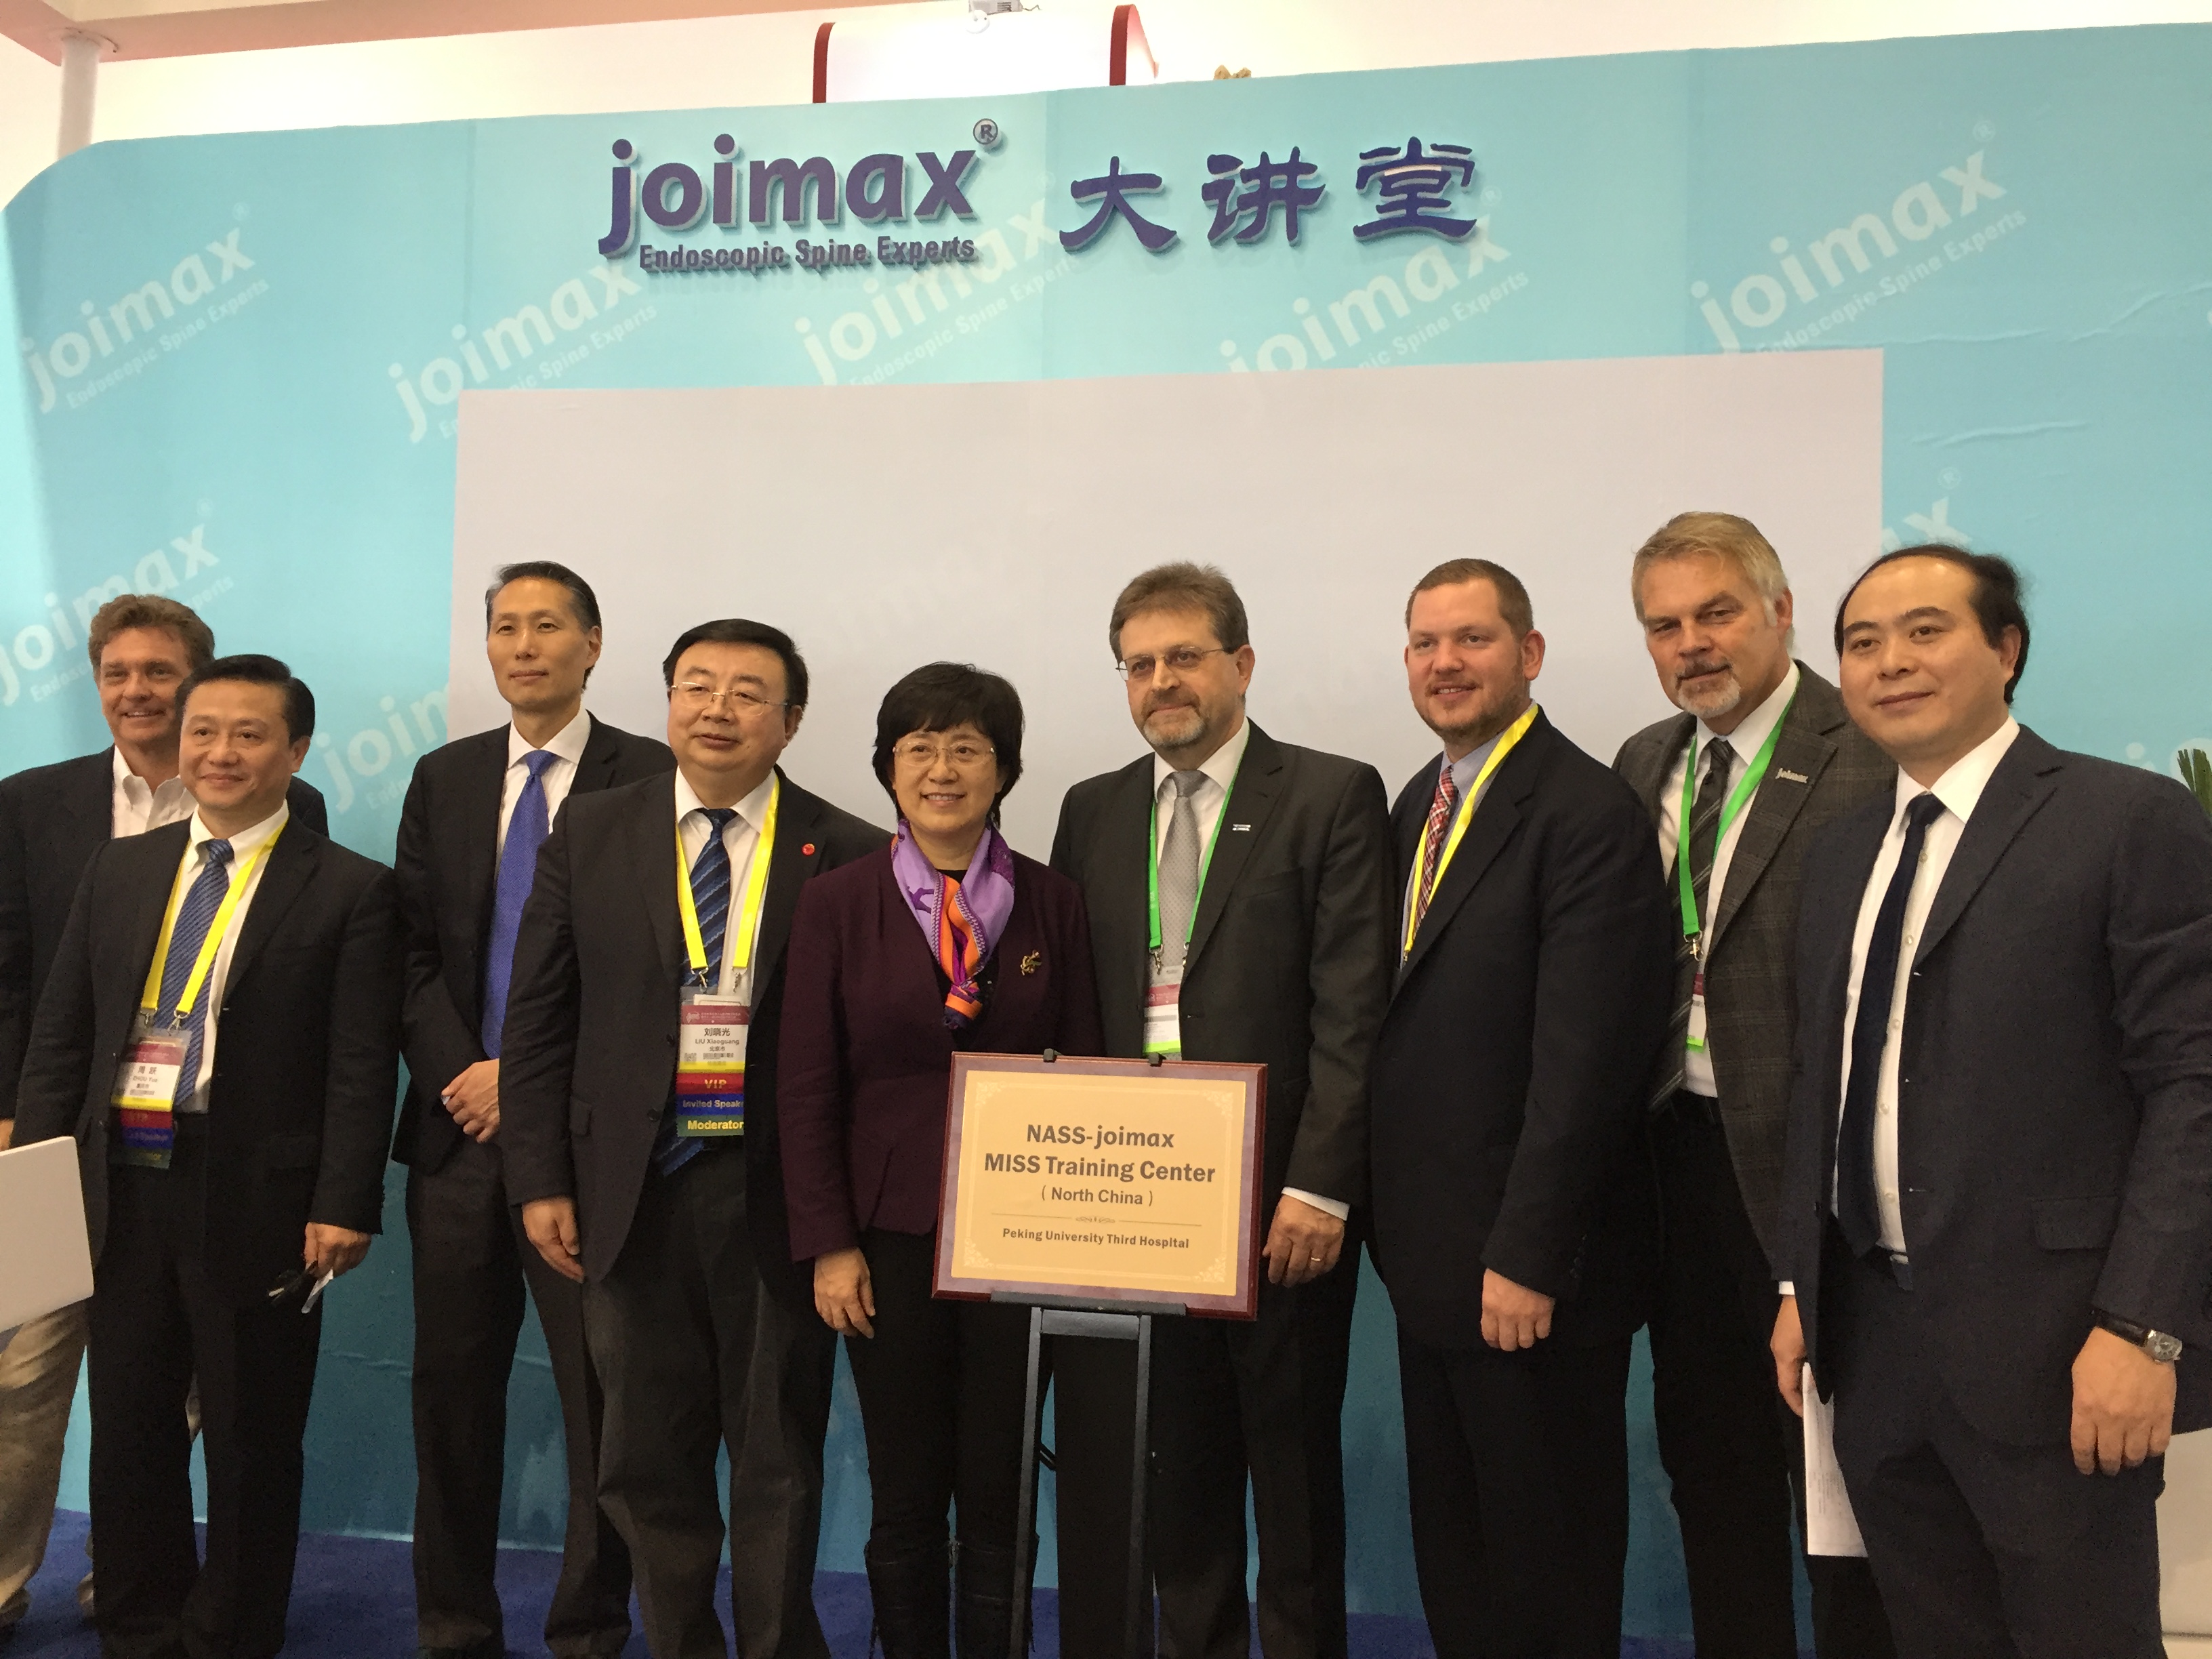 From left to right: Edward Dohring, MD, NASS Board of Directors; Prof. Yue Zhou, Xinqiao Hospital, Chairman of Chinese Society for MISS and joimax® faculty; Jeffrey C. Wang, MD, NASS Board of Directors; Prof. Xiaoguang Liu, Vice President Peking University Third Hospital; Prof. Jie Qiao, President Peking University Third Hospital; Wolfgang Ries, CEO & founder joimax® GmbH; Brad Repsold, NASS Assoc. Executive Director; Michael Roberz, International Sales Director joimax® GmbH; Qinguang You, General Manager joimax® China.